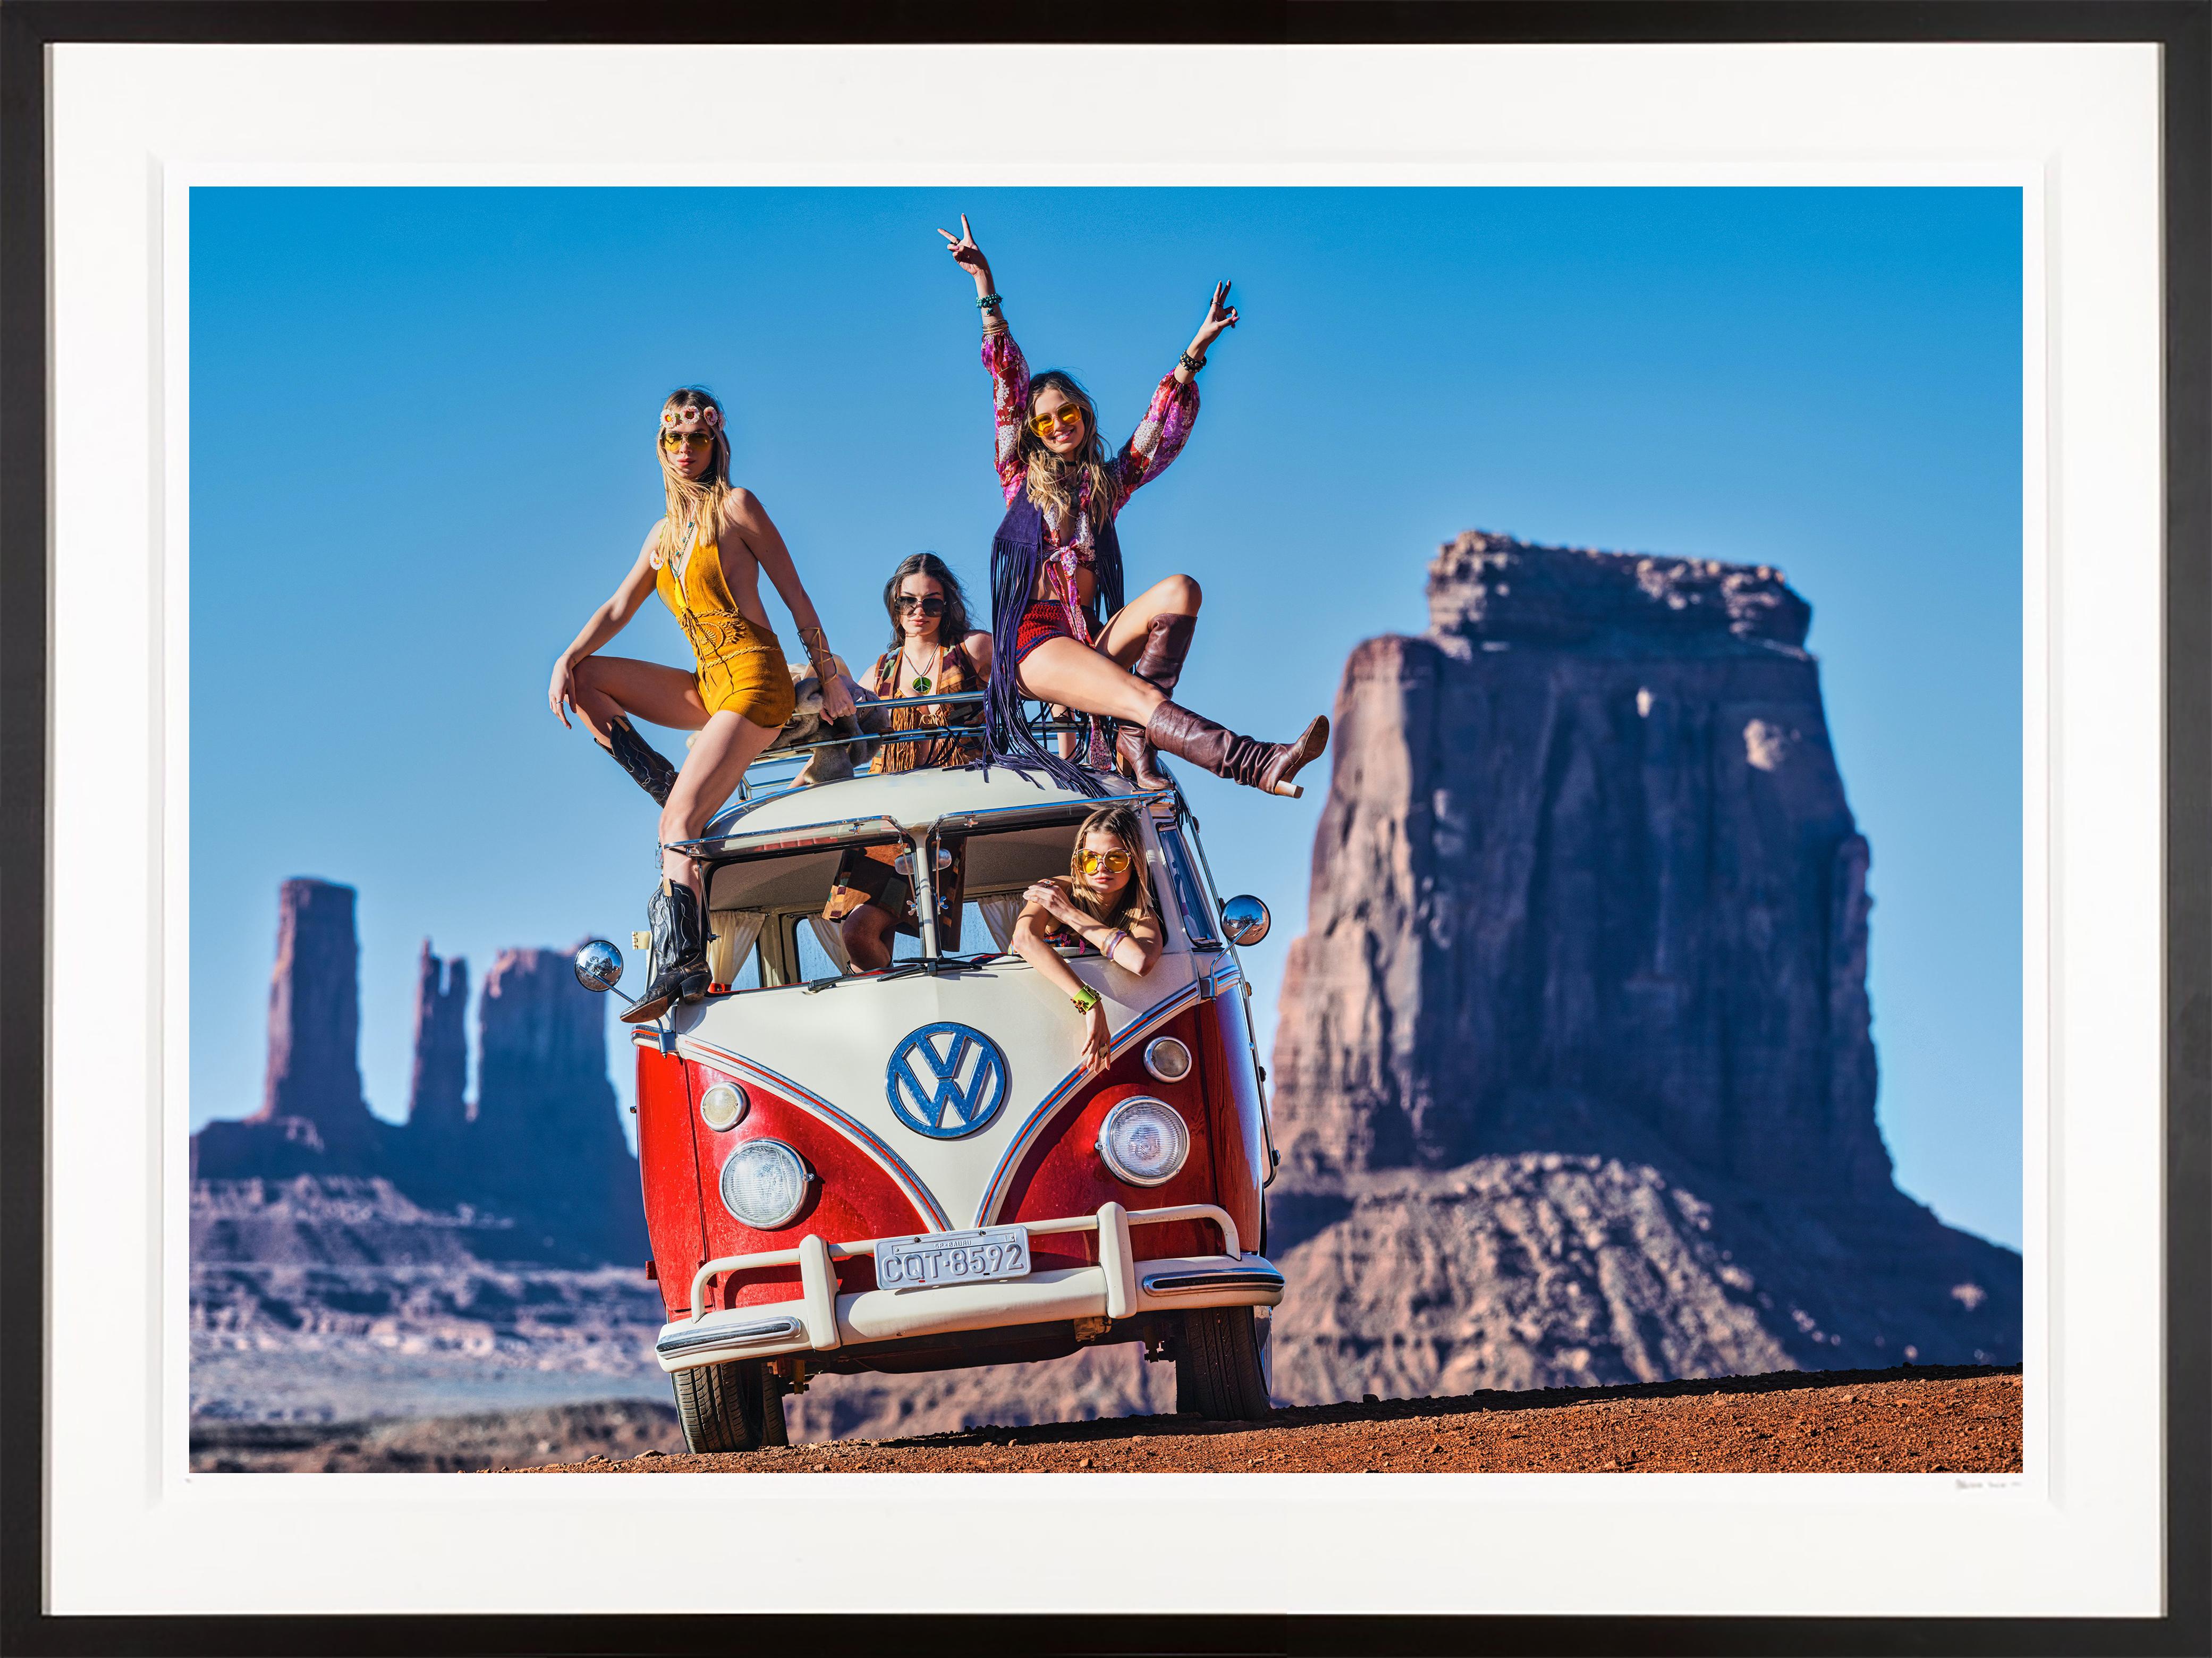 "And The Party Never Ends" Sexy Photograph in Monument Valley with Vintage VW